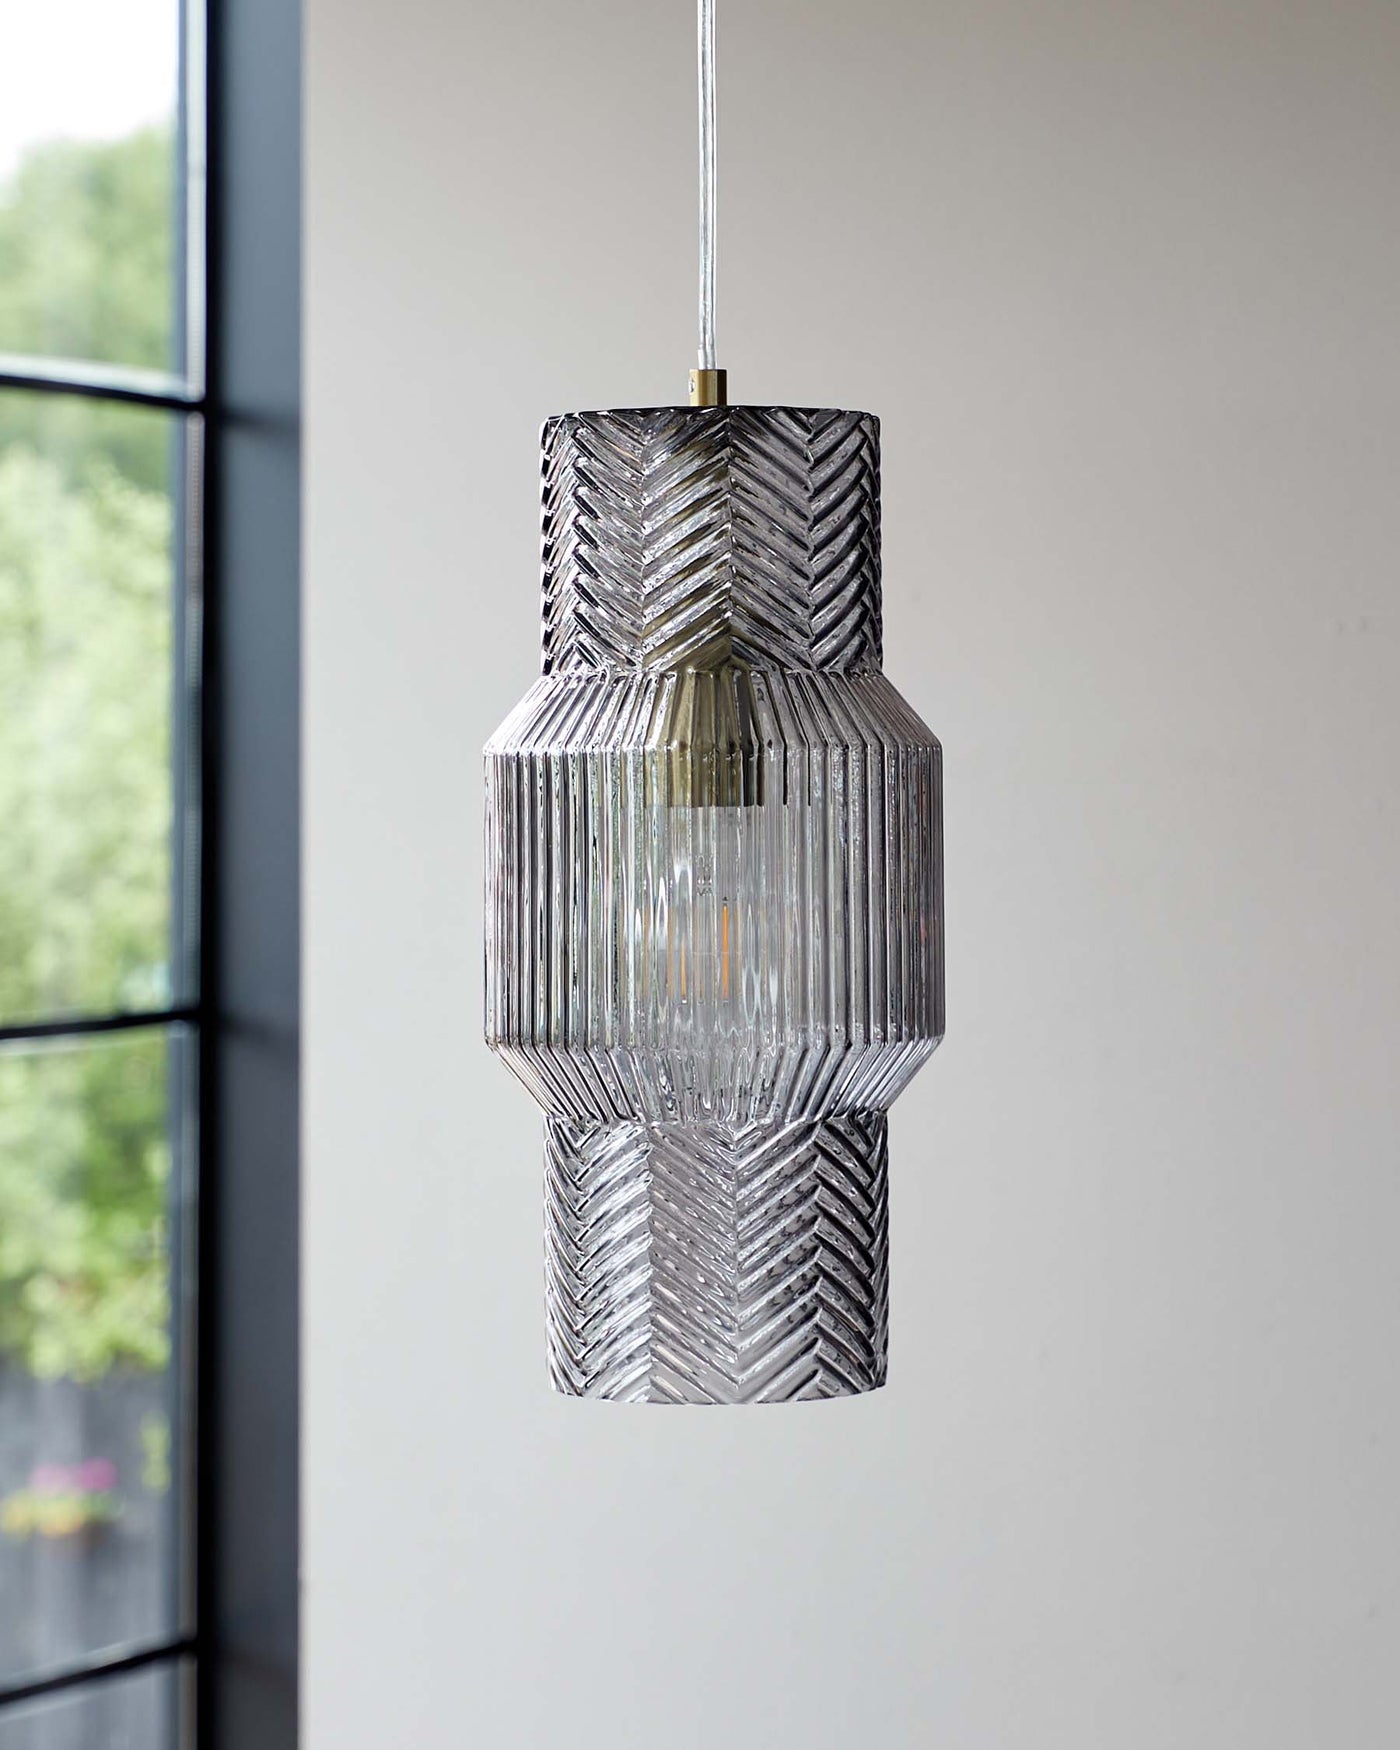 Elegant tiered glass pendant light with textured surfaces, suspended from a metallic fixture.